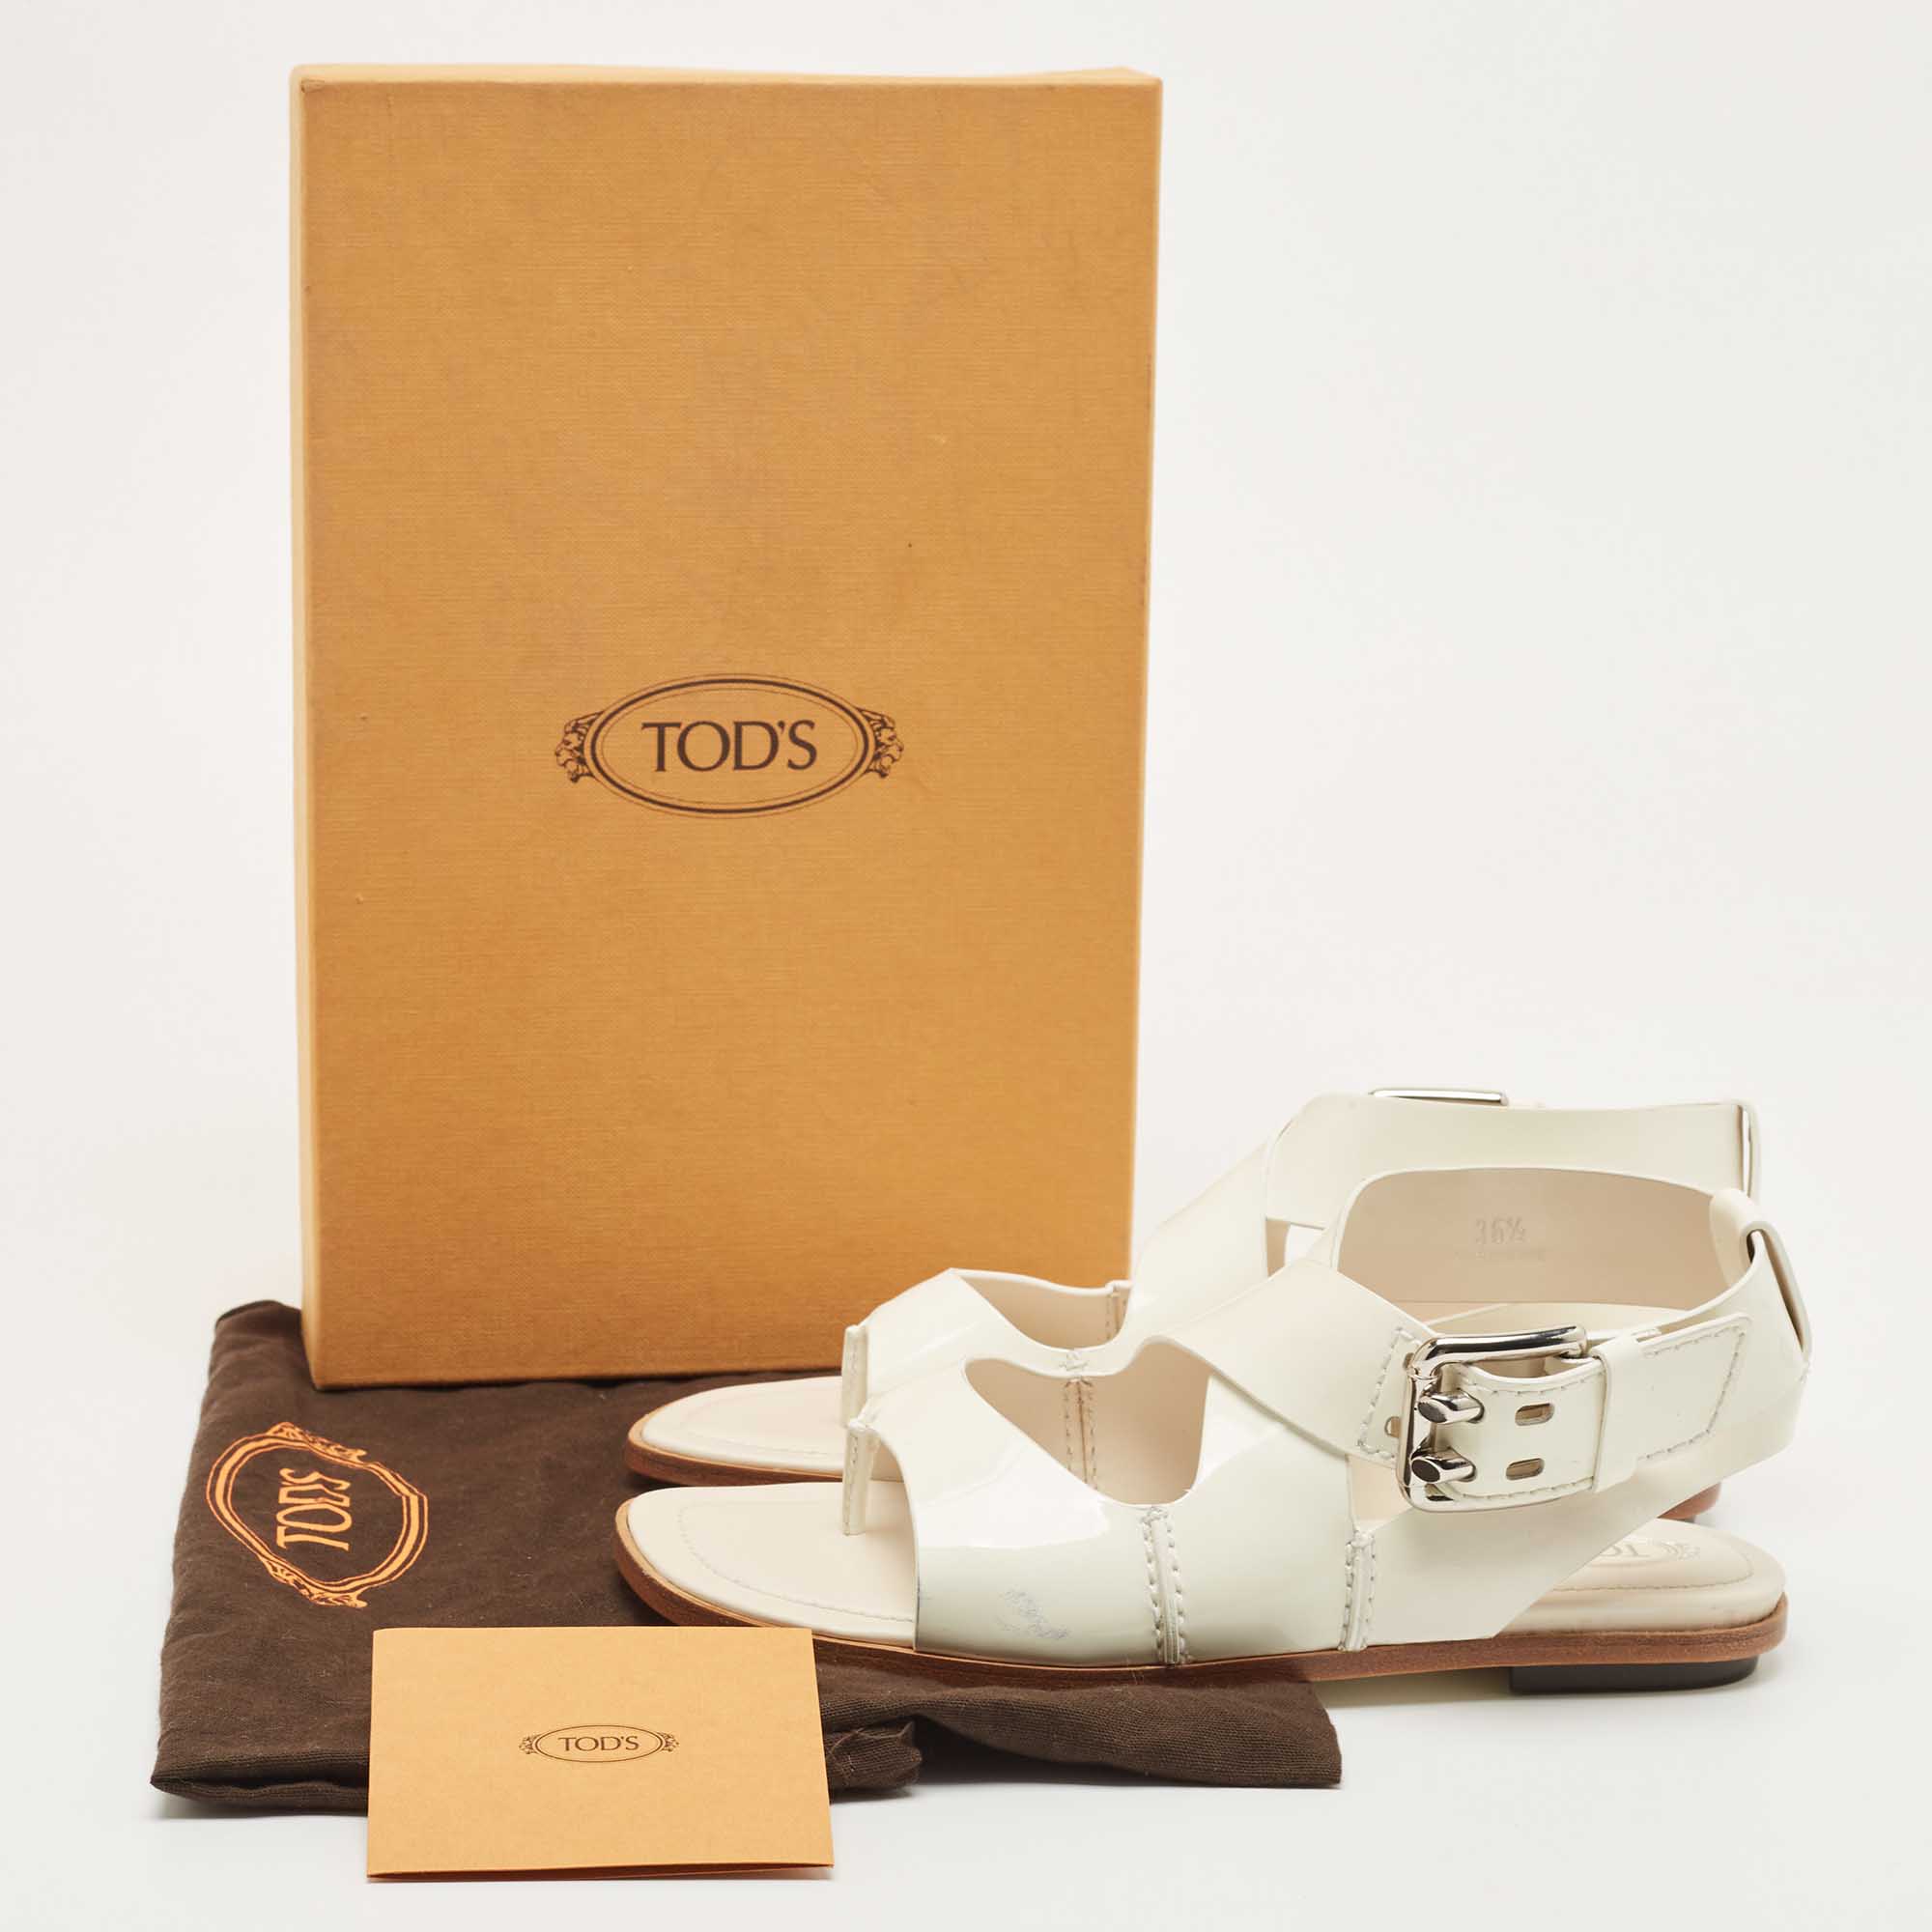 Tod's  Cream Patent Leather Cross Strap Flat Sandals Size 36.5